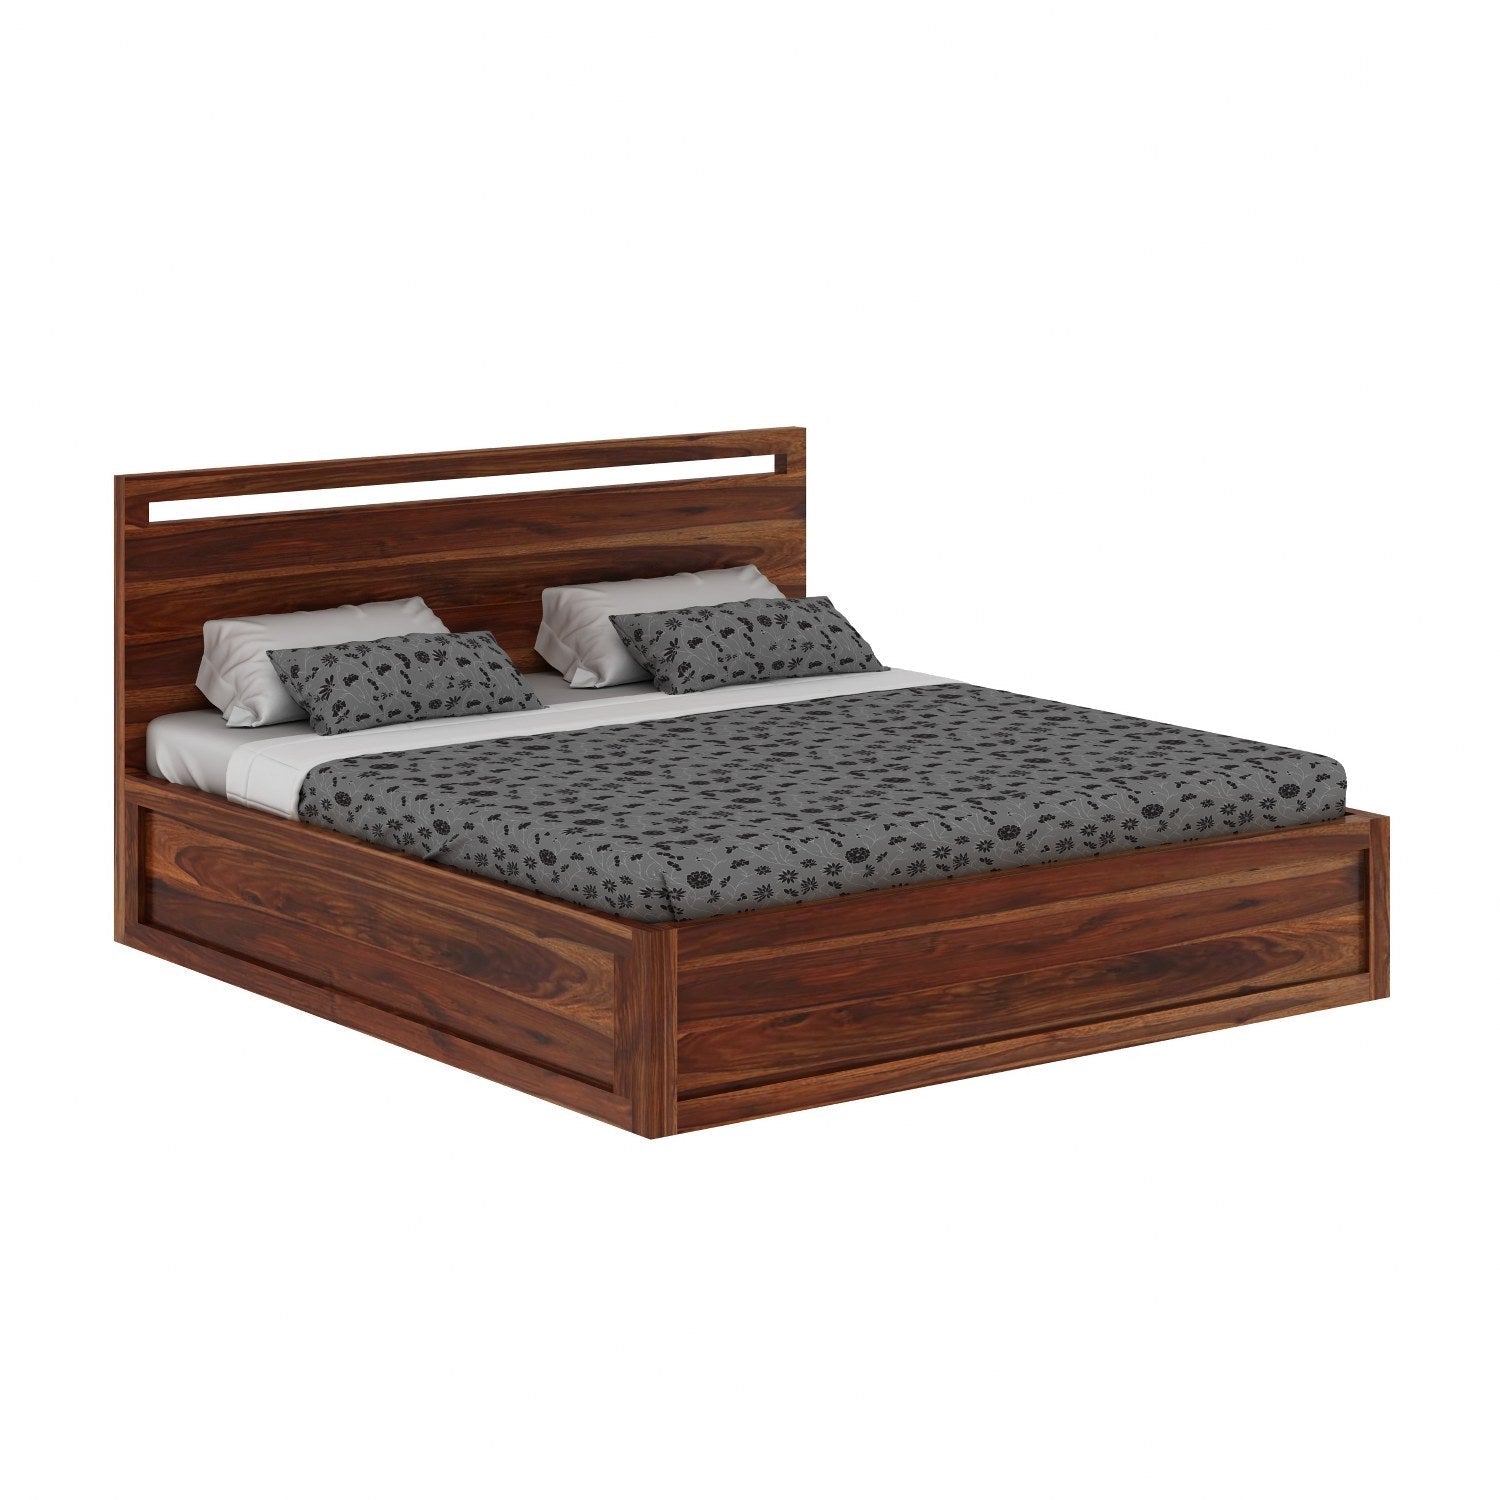 Livinn Solid Sheesham Wood Bed With Box Storage (Queen Size, Natural Finish)